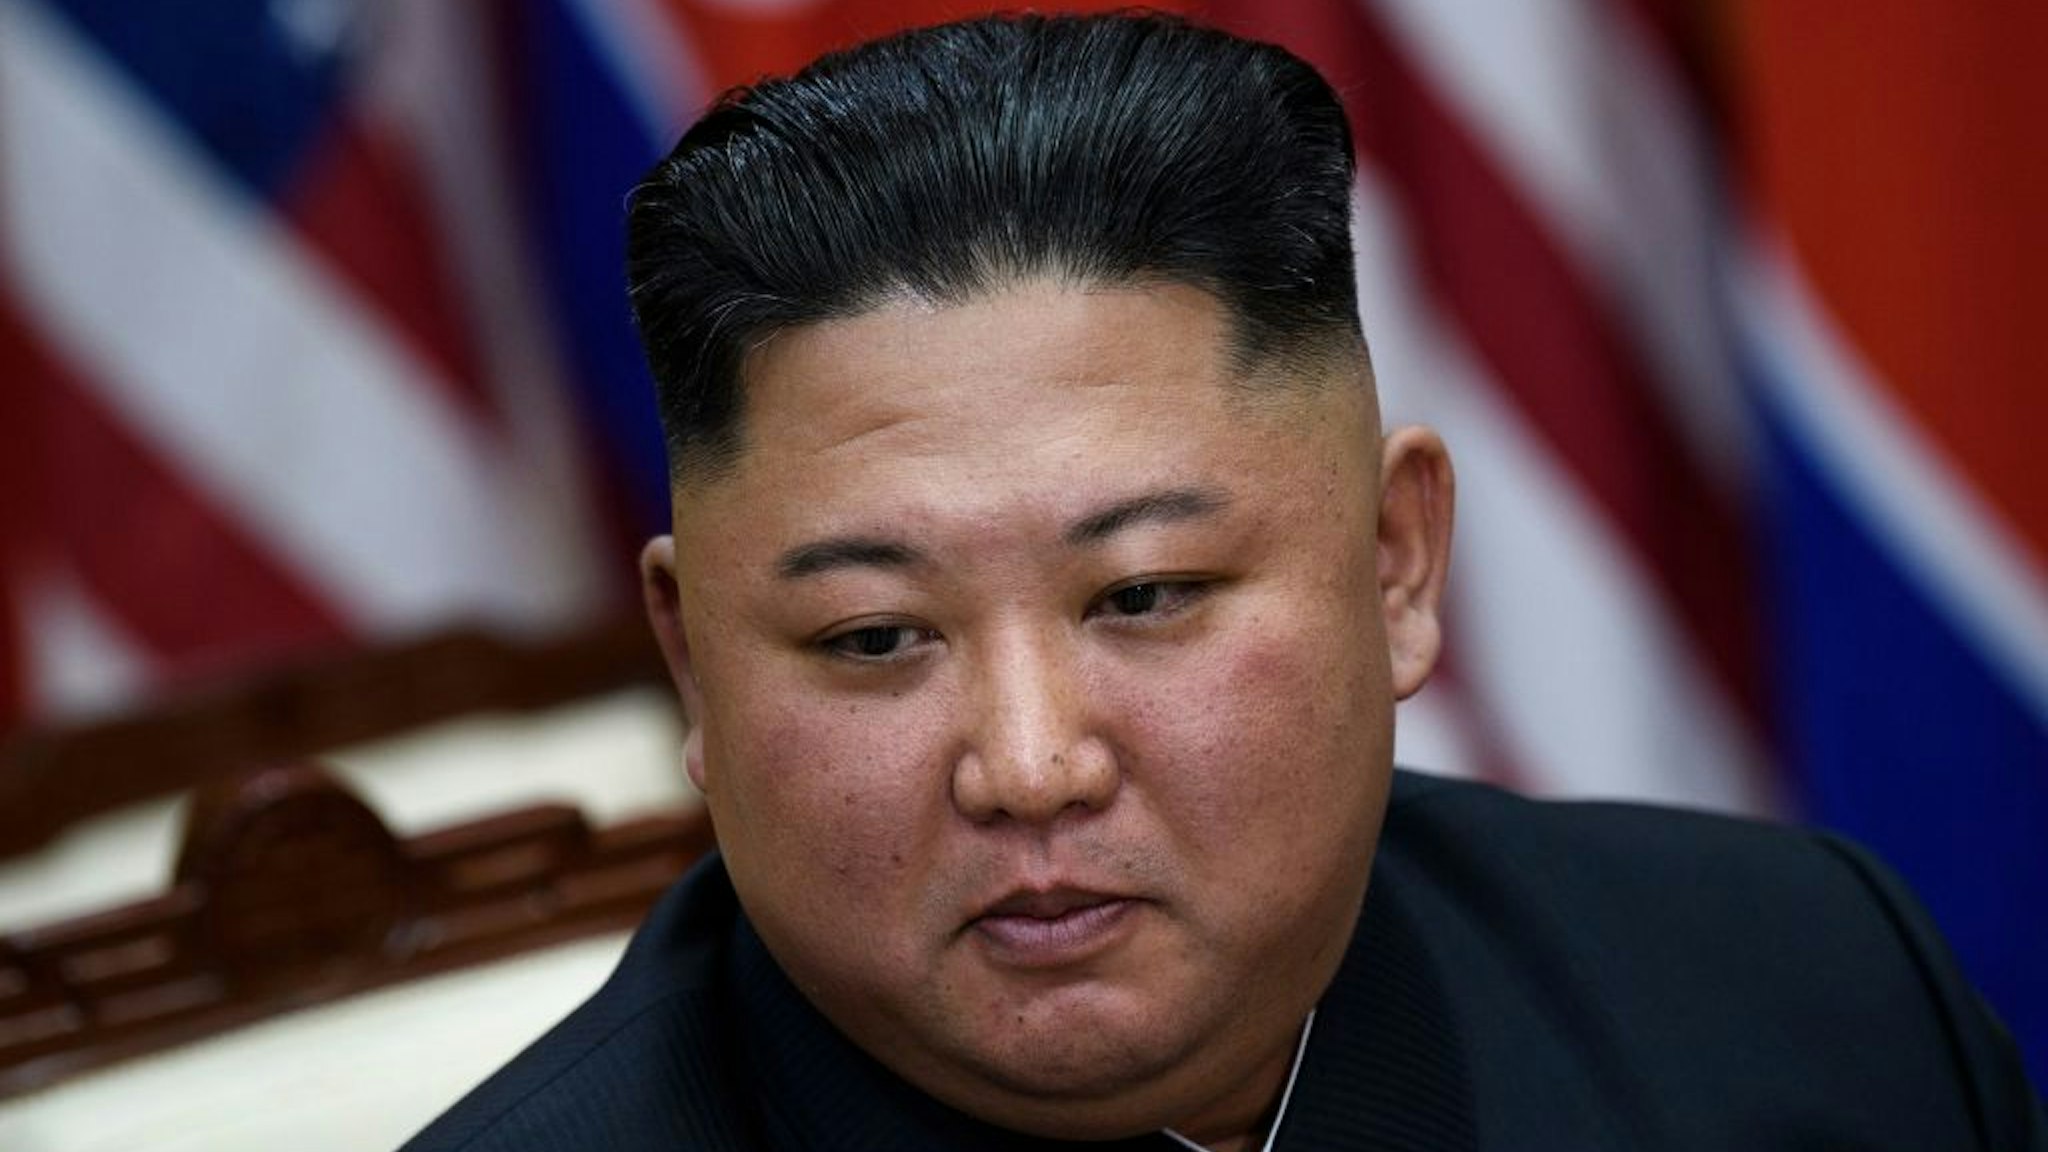 North Korea's leader Kim Jong Un before a meeting with US President Donald Trump on the south side of the Military Demarcation Line that divides North and South Korea, in the Joint Security Area (JSA) of Panmunjom in the Demilitarized zone (DMZ) on June 30, 2019.